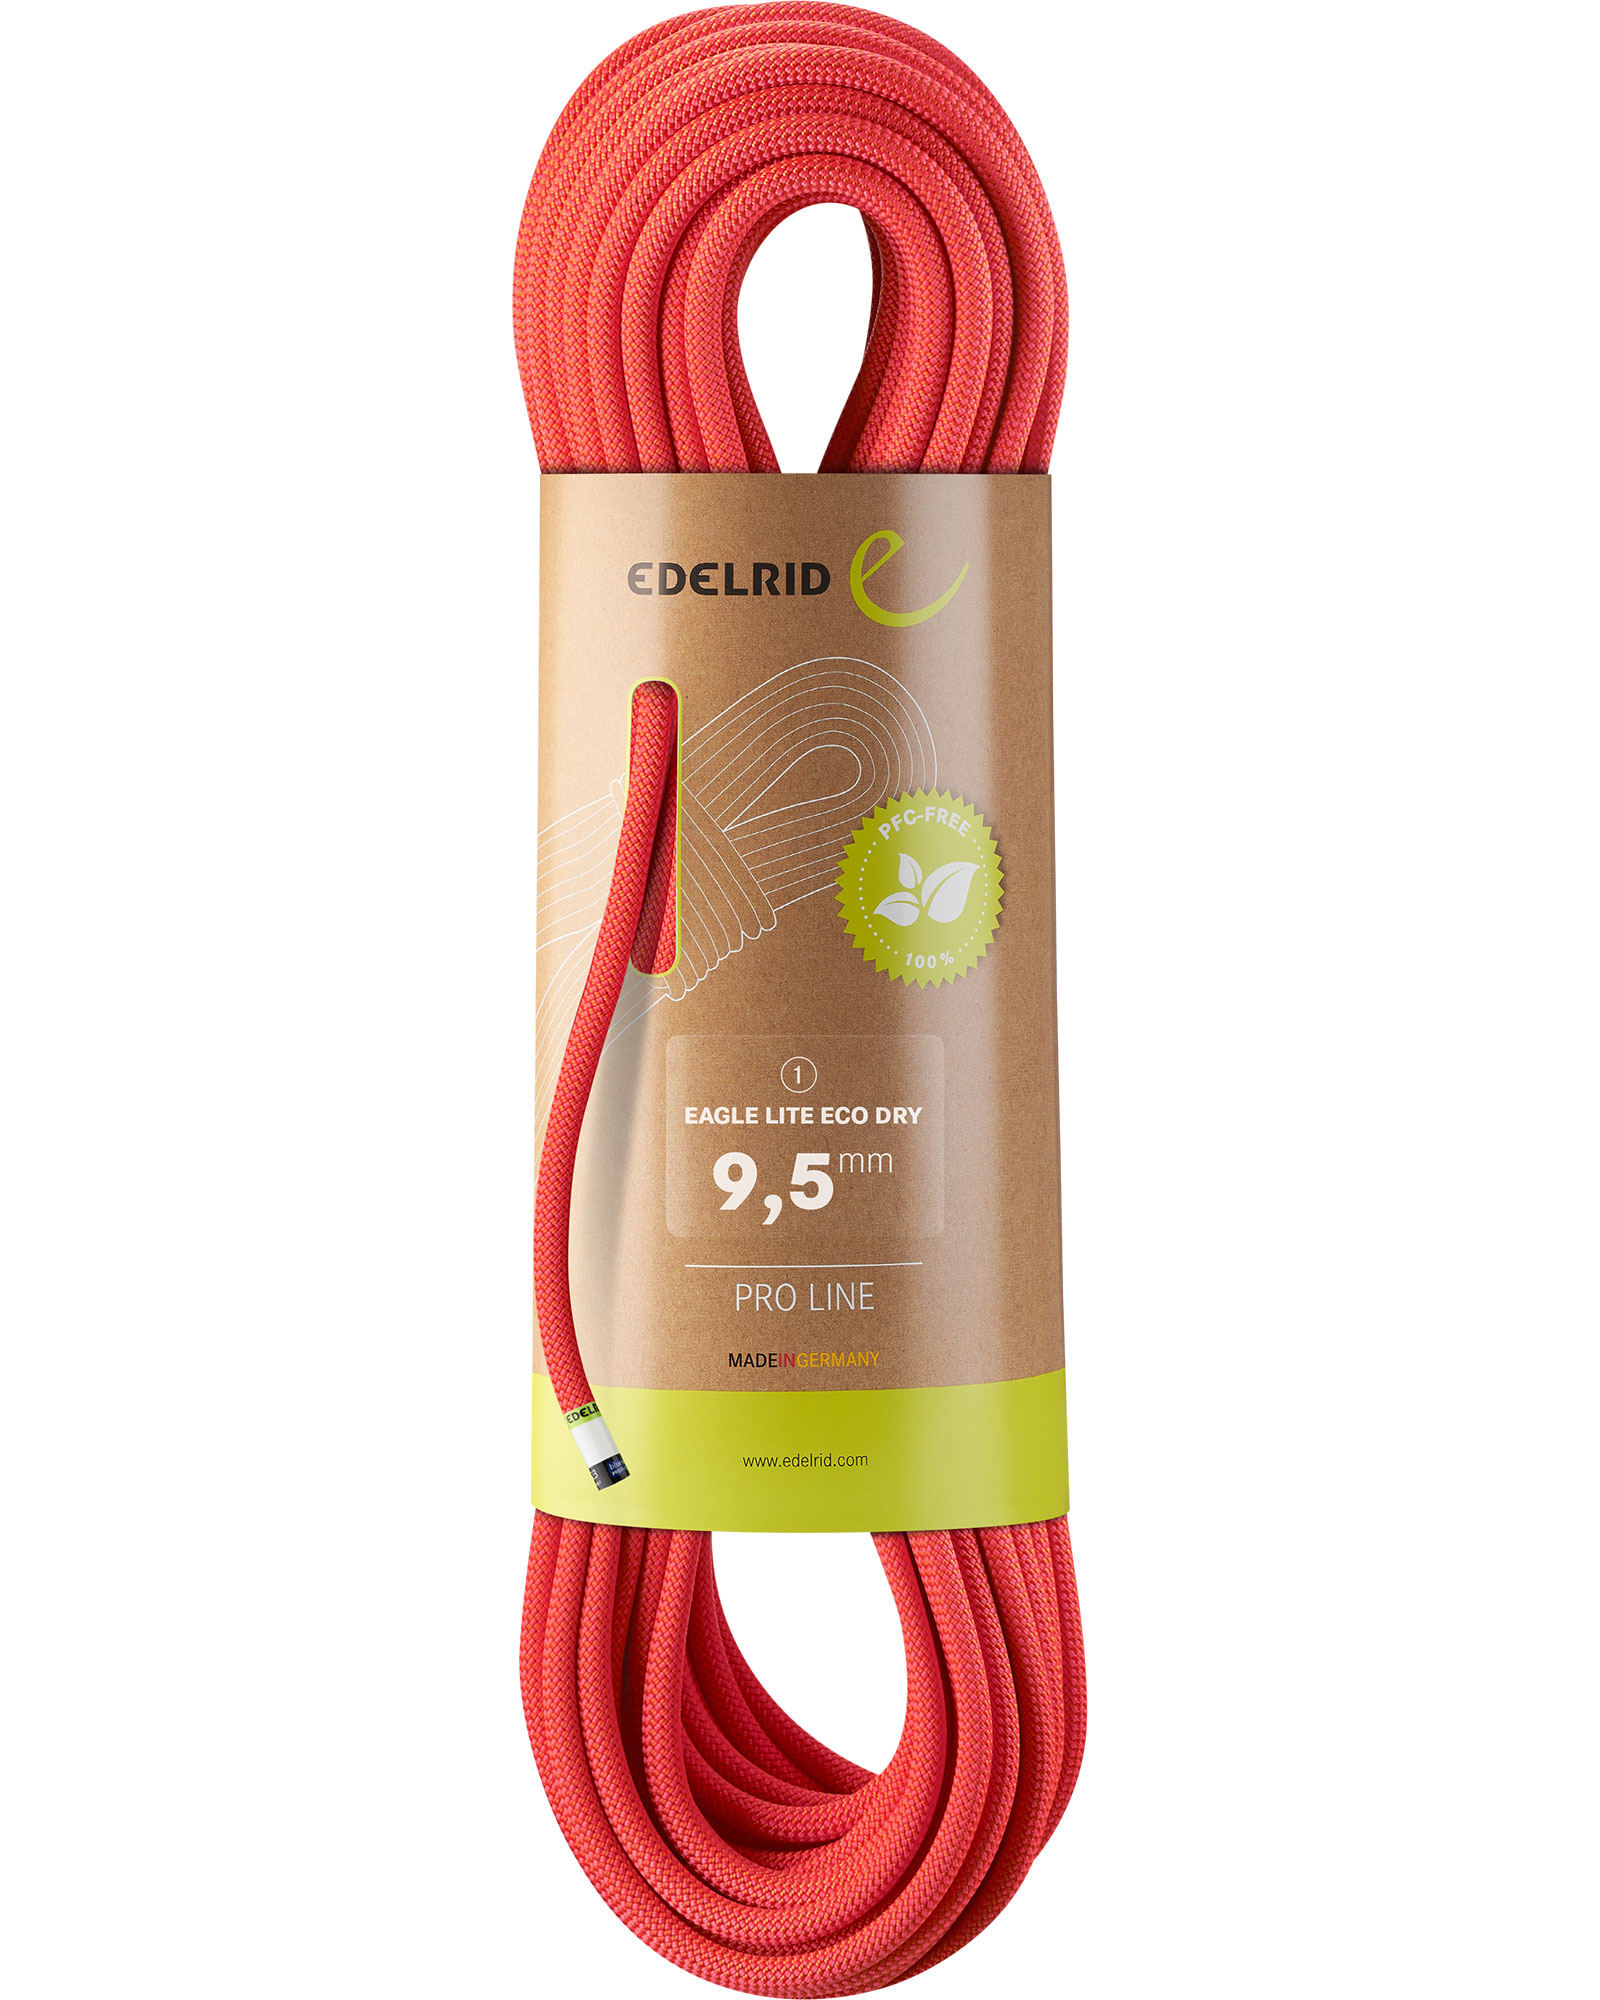 Edelrid Eagle Lite Eco Dry 9.5 x 60 Rope - Neon Coral 60m